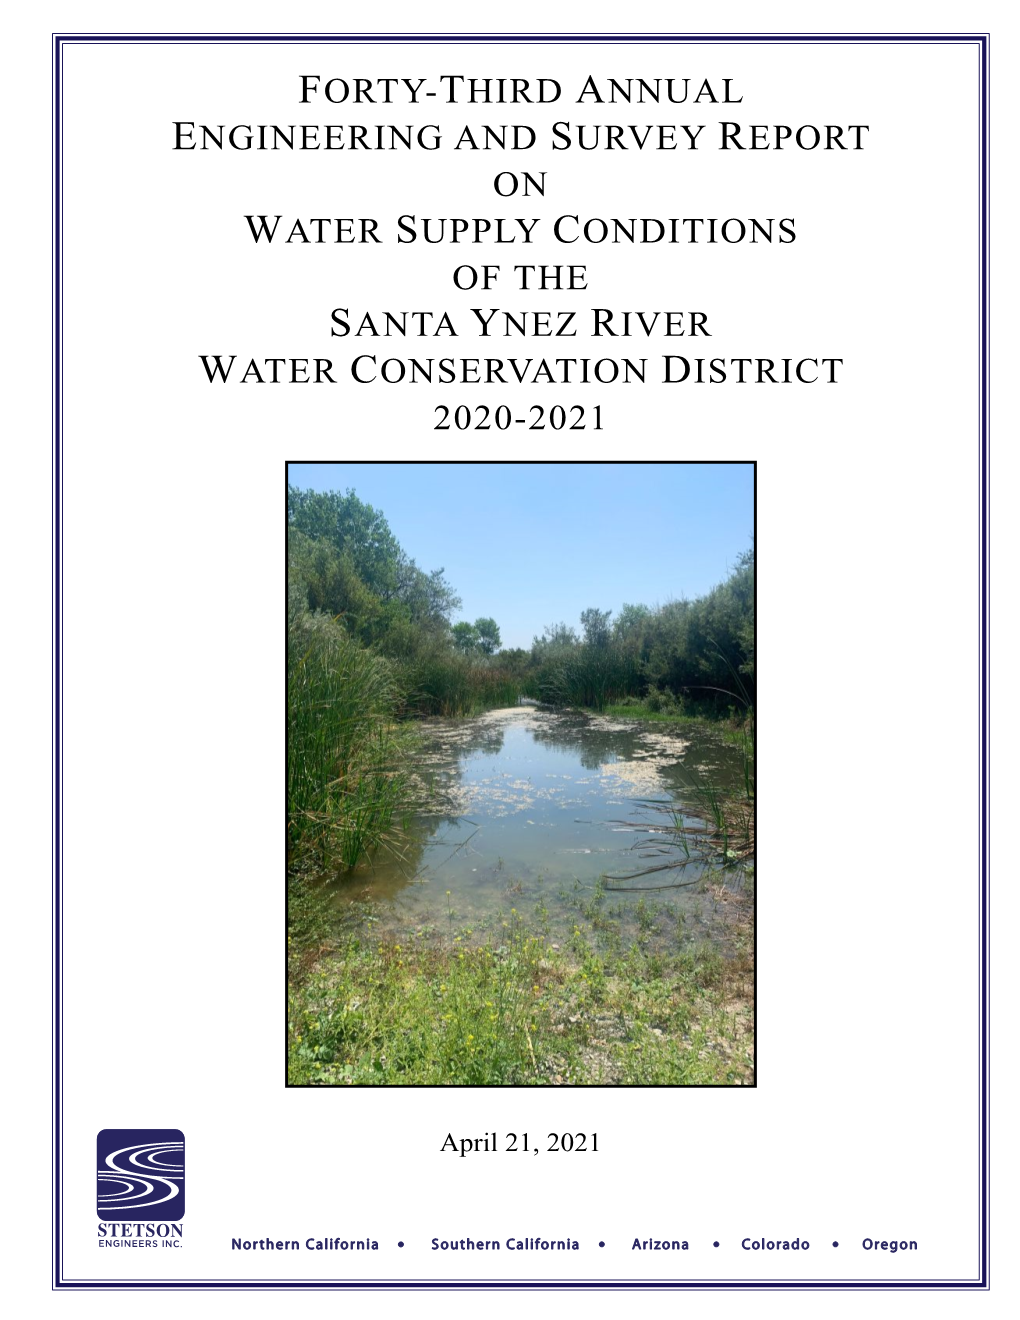 The 43Rd Annual Engineering and Survey Report on Water Conditions of the Santa Ynez River Water